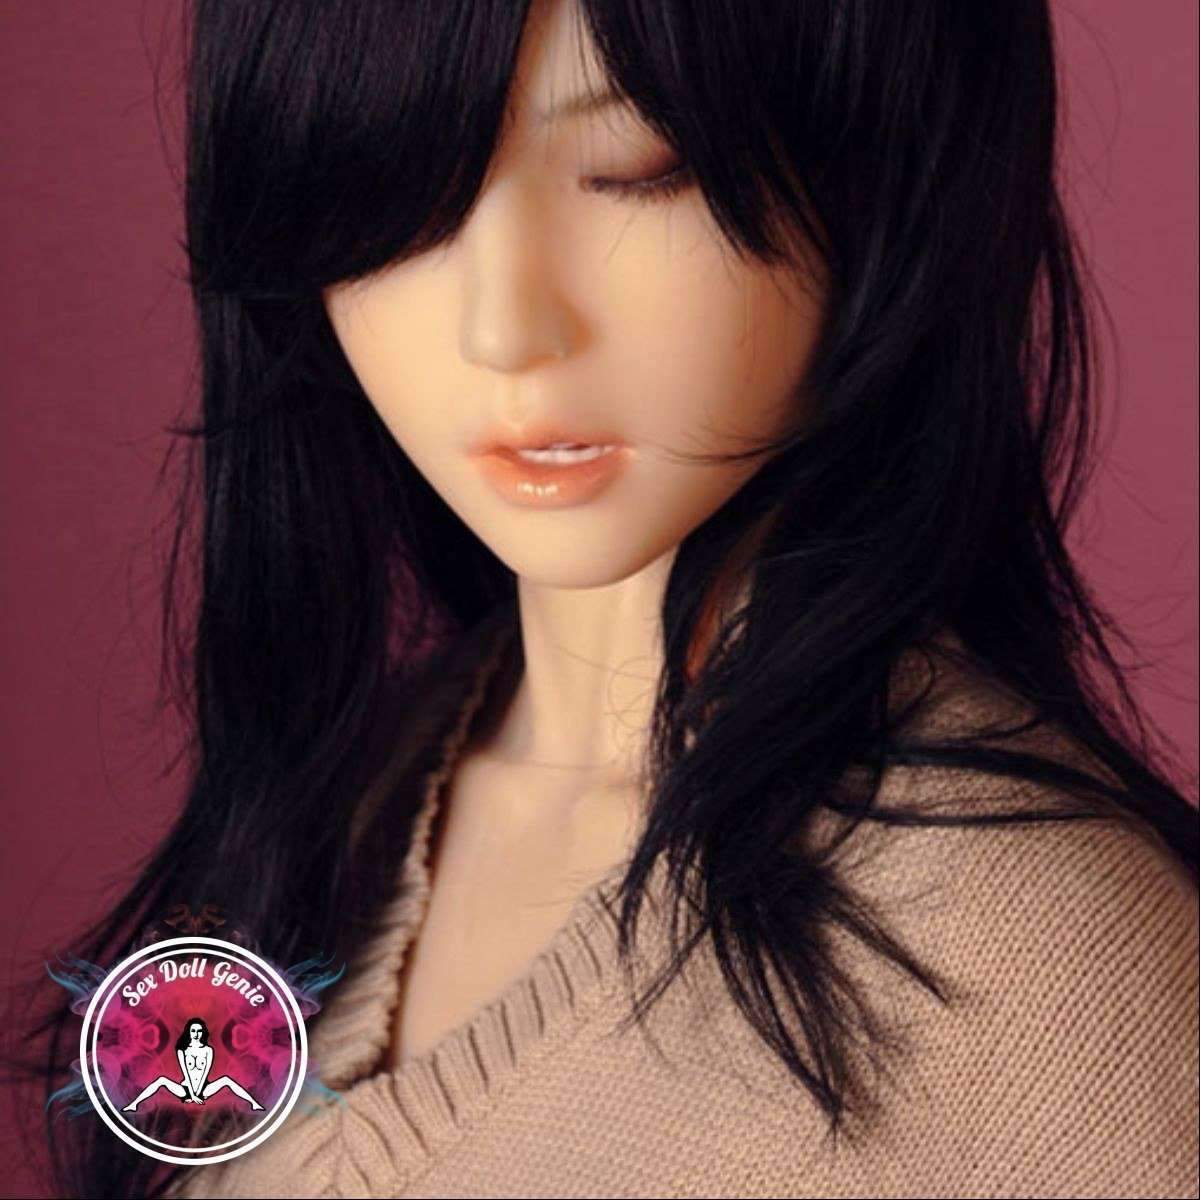 DS Doll - 163 - KaylaCE Head - Type 1 D Cup Silicone Doll-3